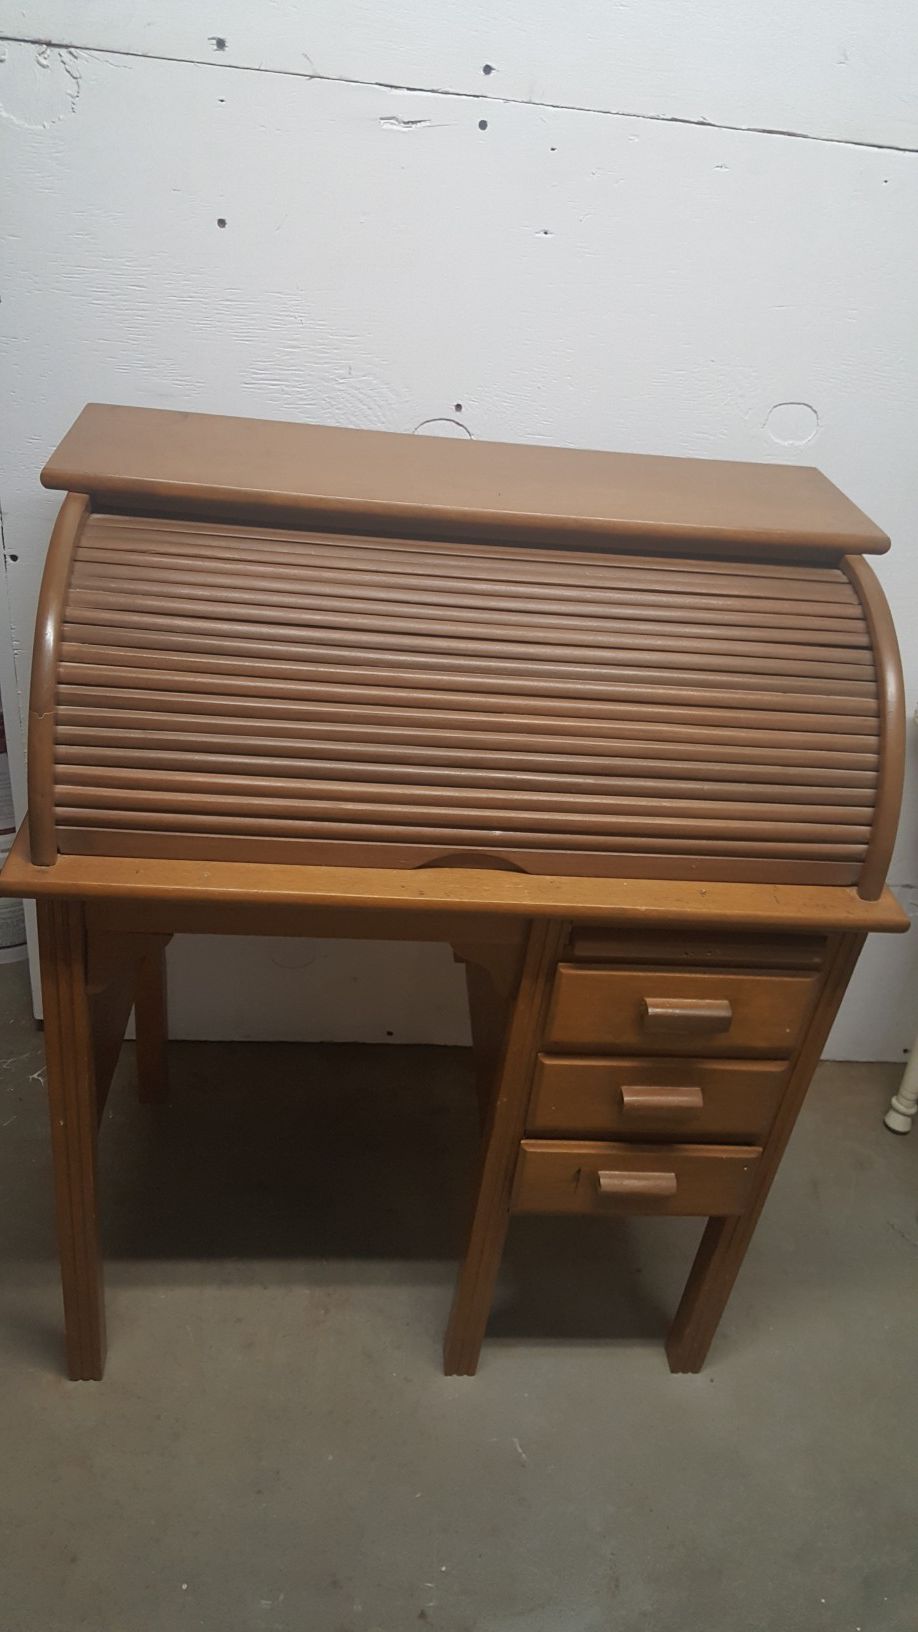 Antique roll top desk over 50 years old